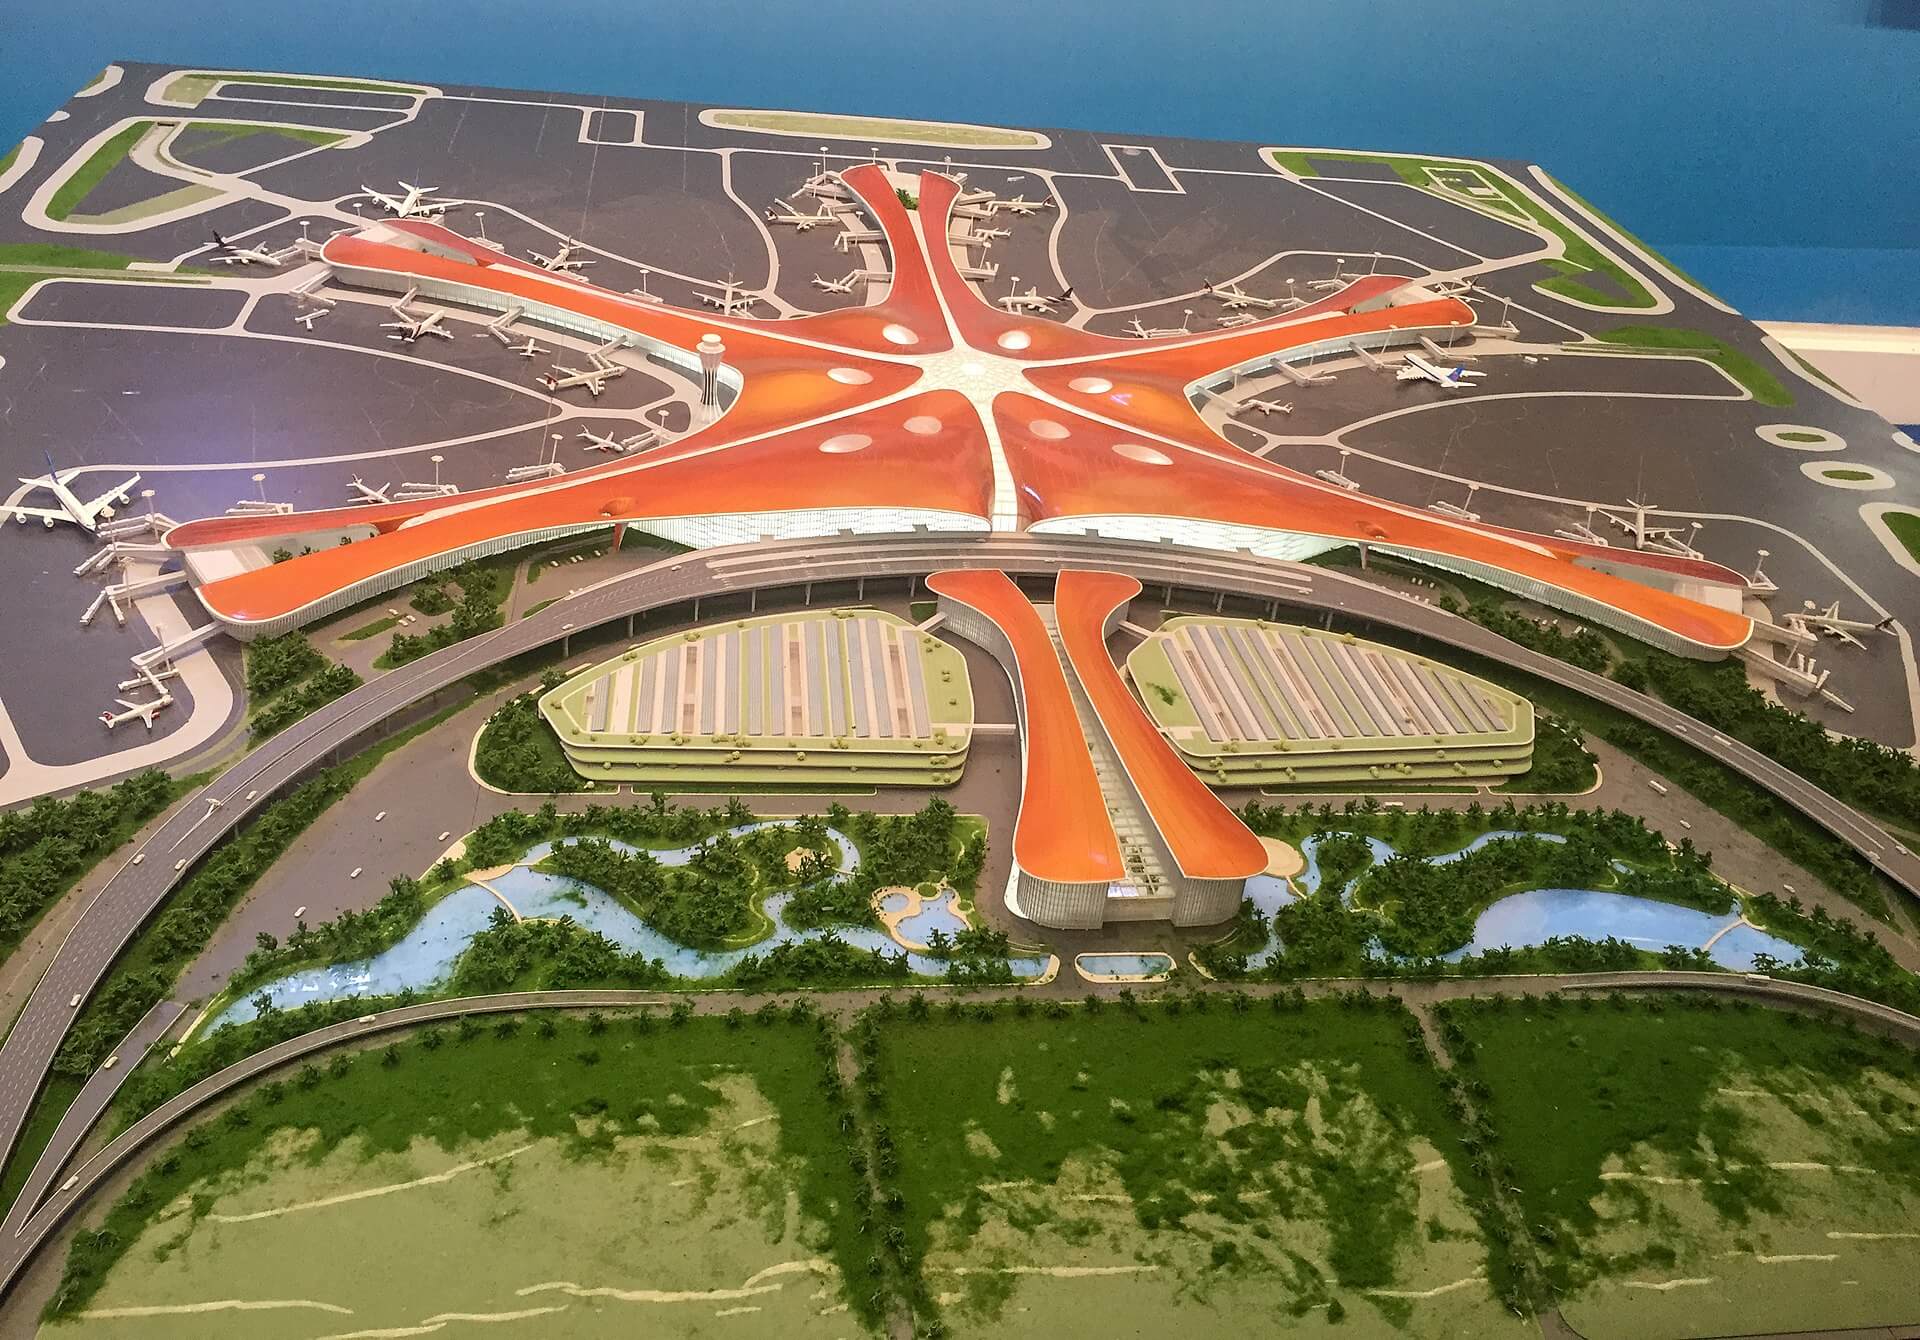 1920px-Model_of_Beijing_New_Airport_at_the_Five Year_Achievements_Exhibition_20171015150600